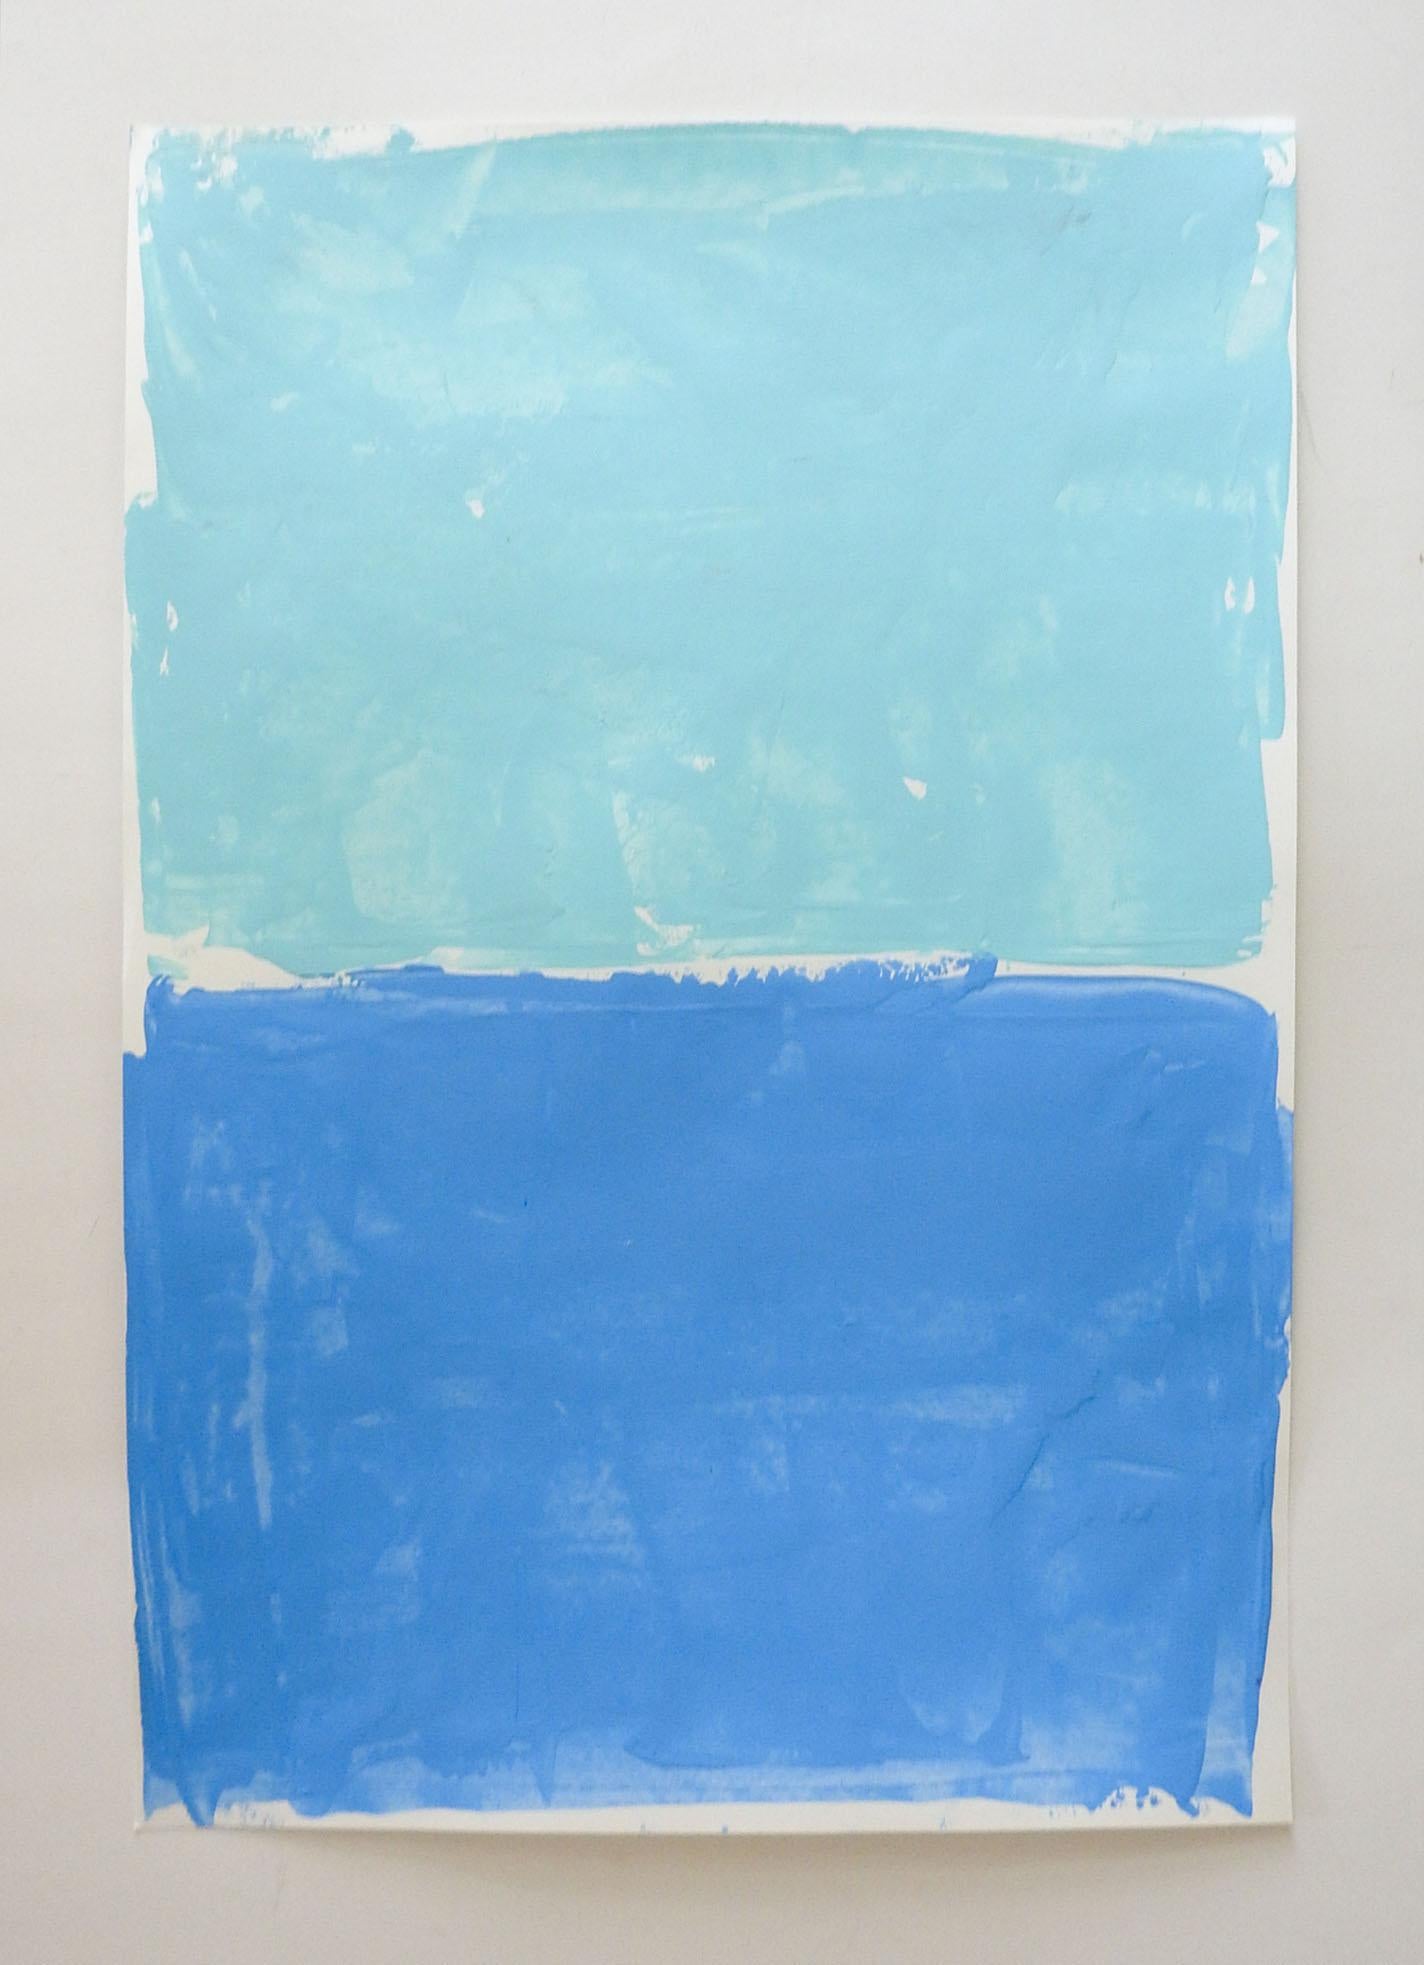 Contemporary 2019 aqua and blue abstract acrylic on paper painting by David Grinnell (21st century) Texas. Unsigned, dated 2019 on verso, from the artists estate. Unframed, good condition.